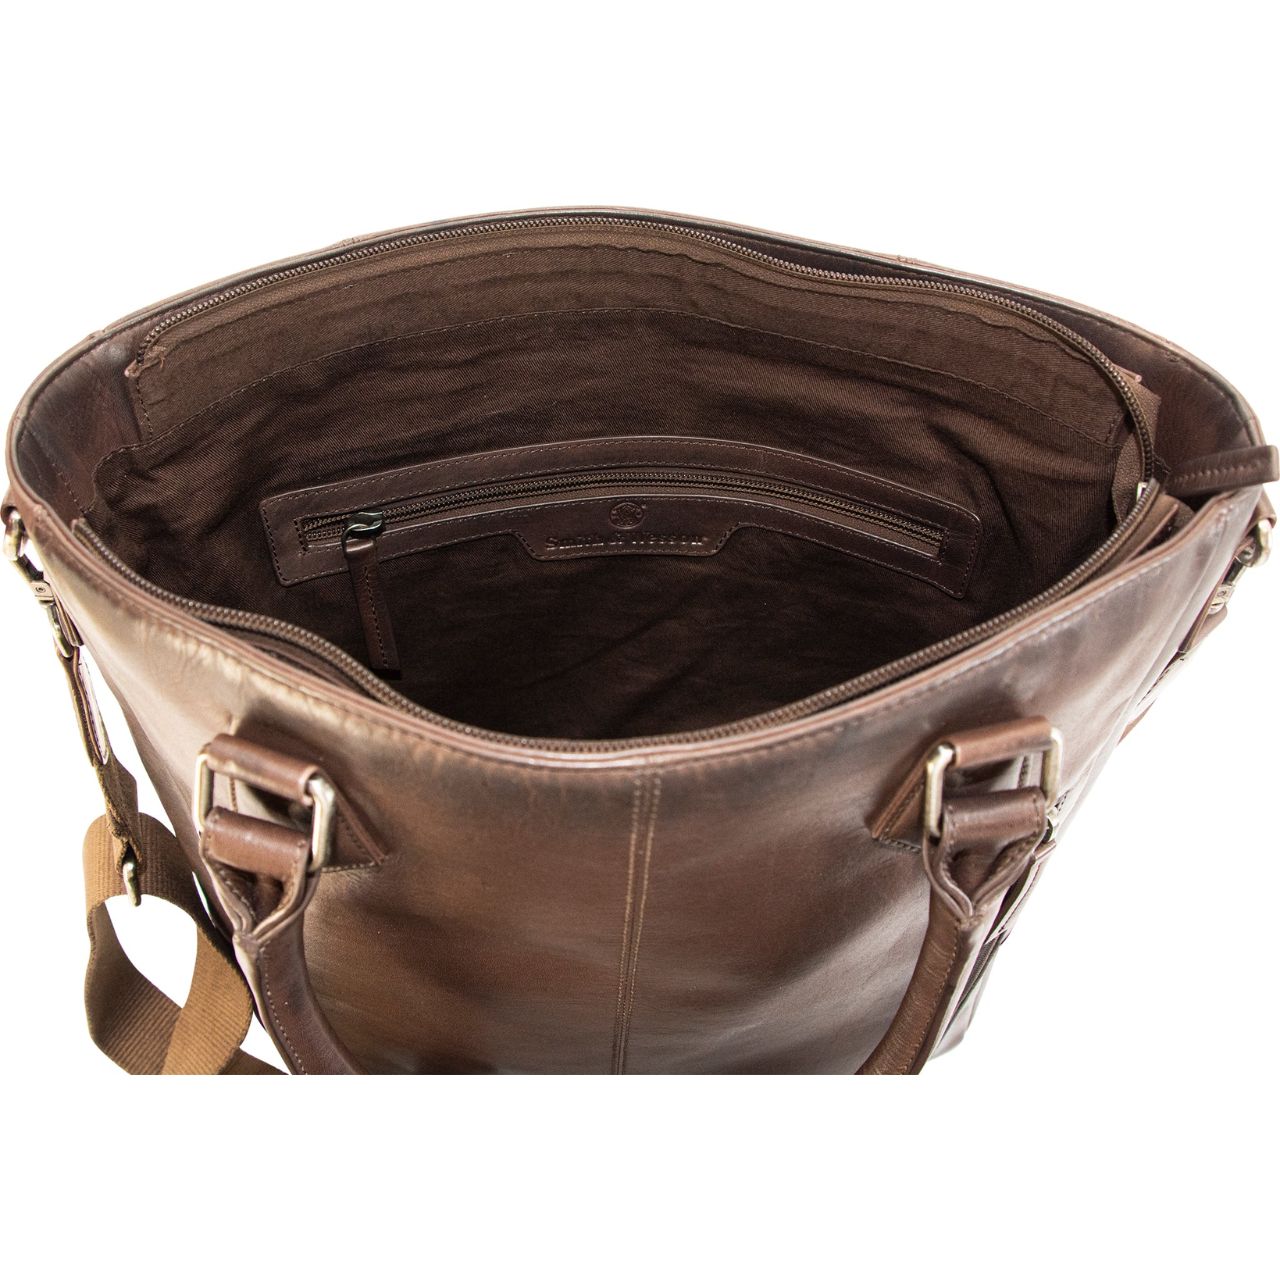 Interior of Dark Brown Flat Tote Concealed Carry Purse